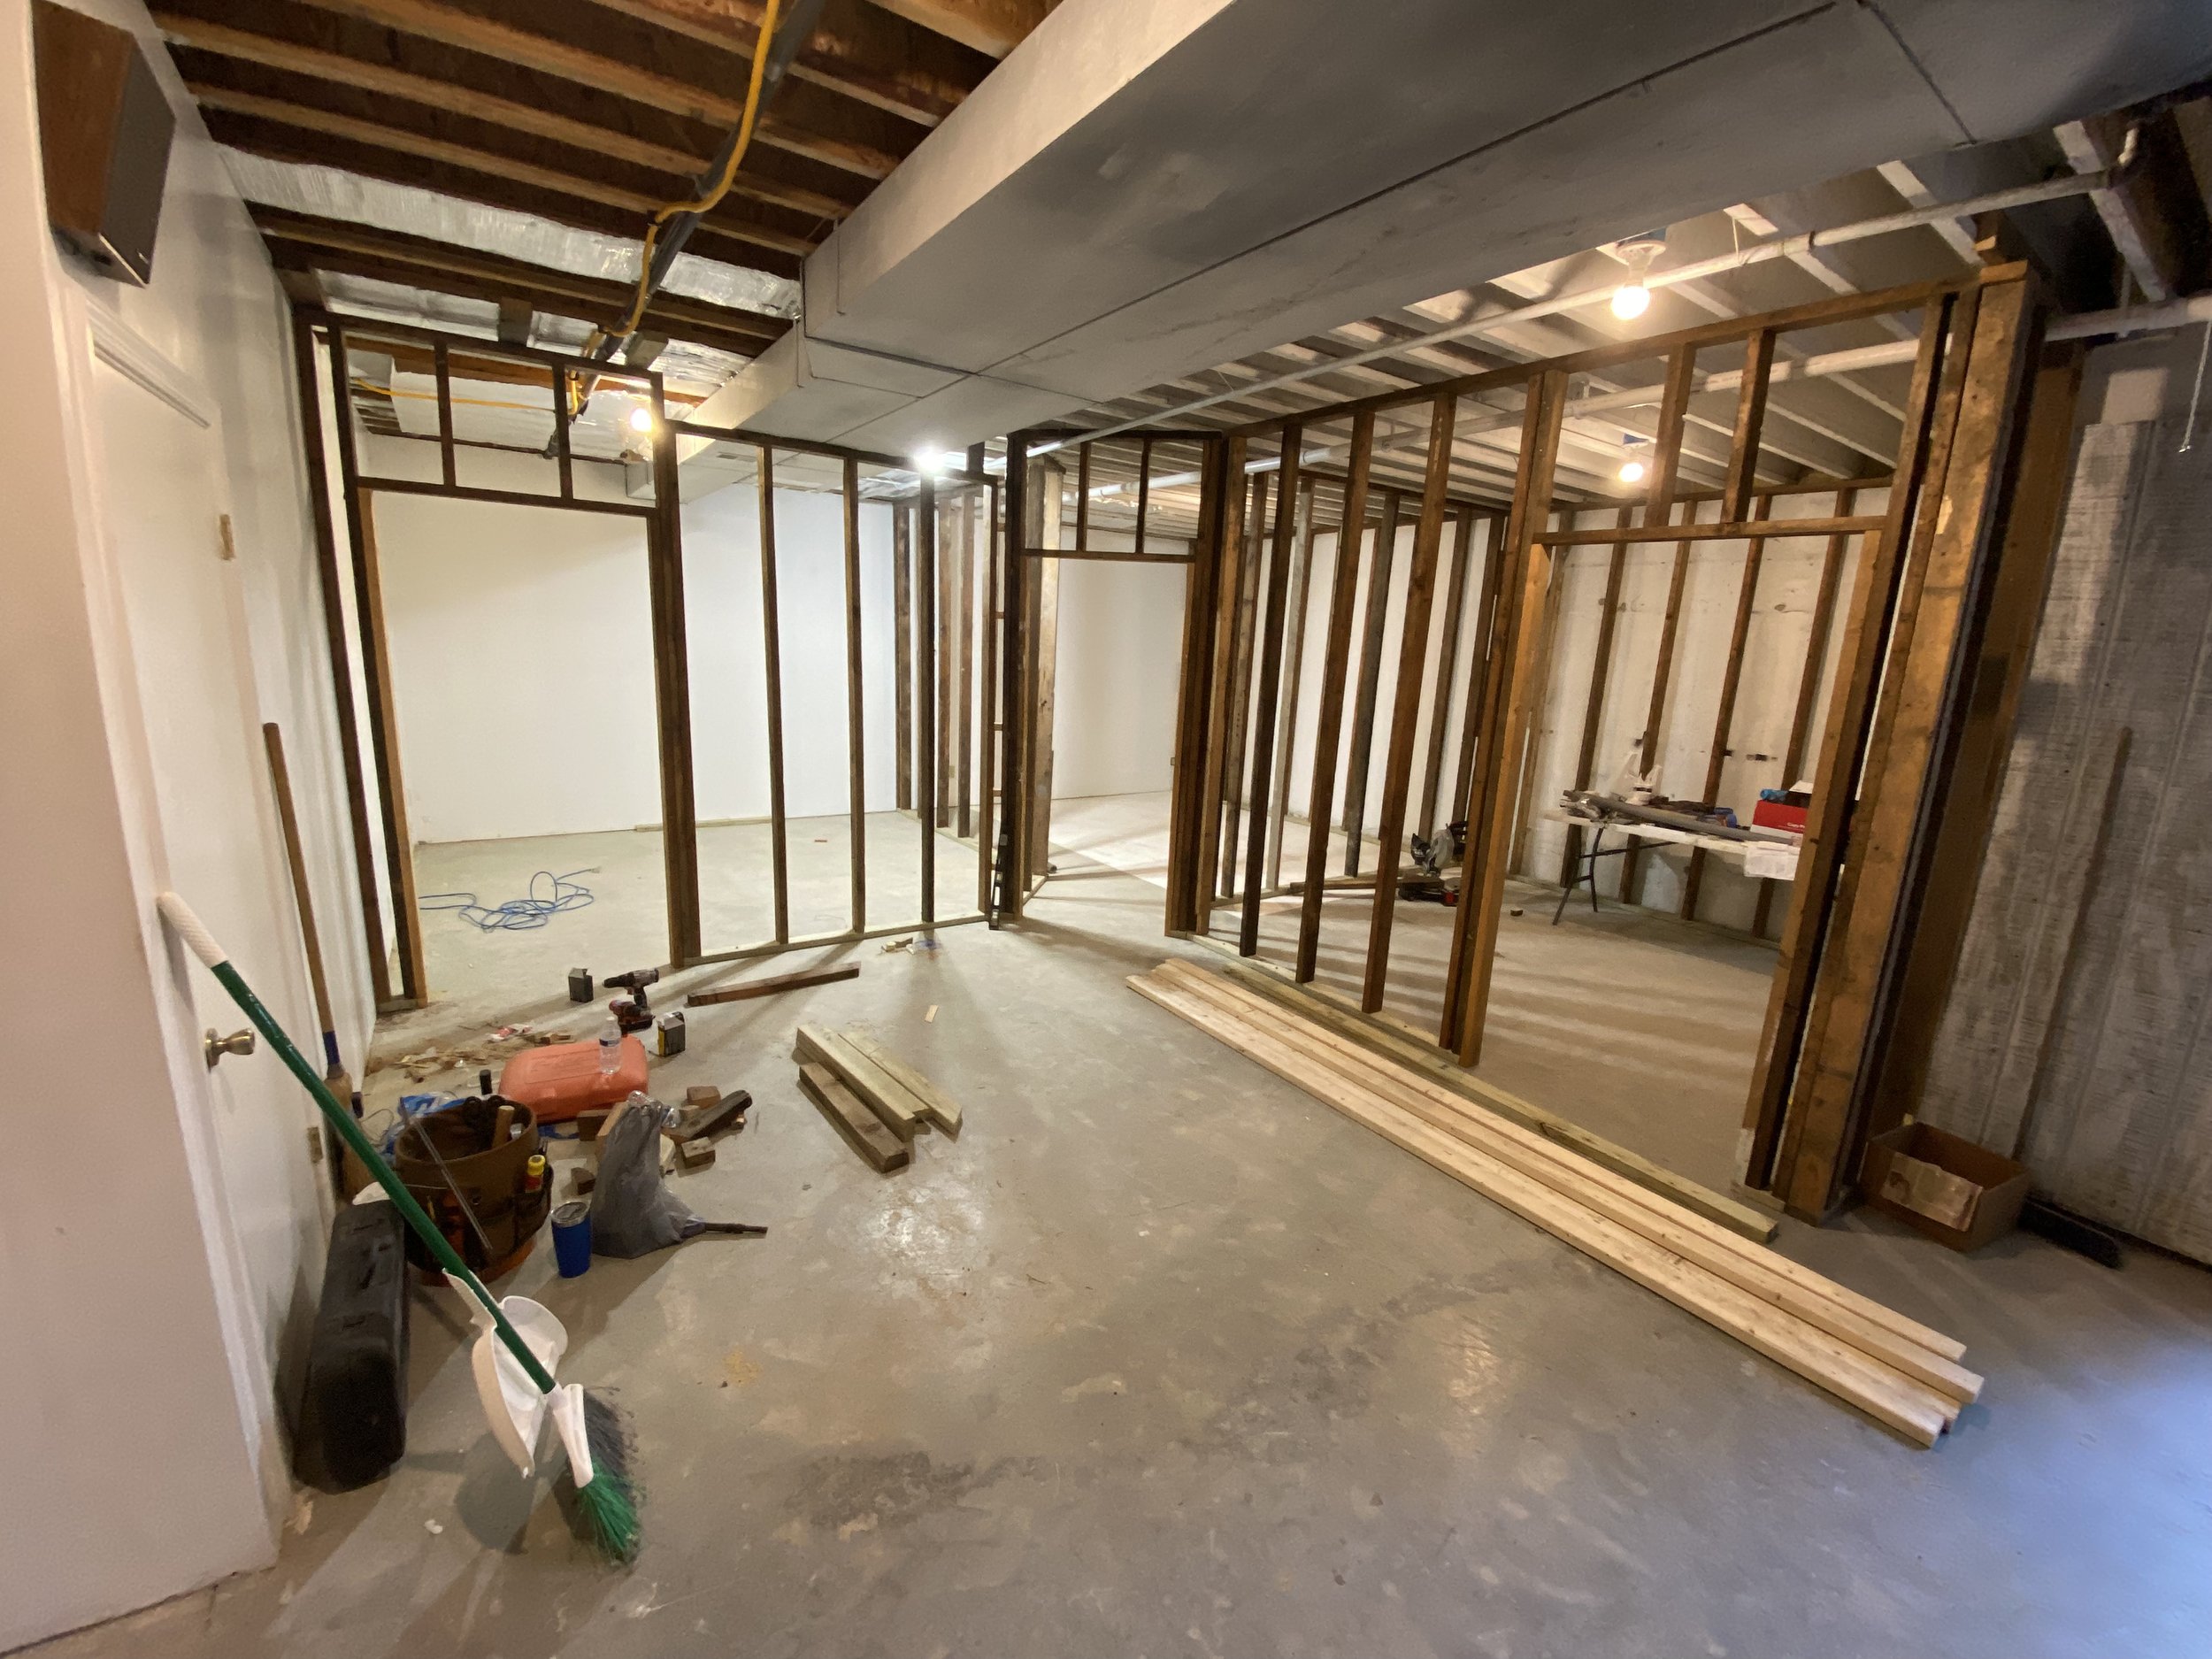  Basement area with the three bedrooms framed out 